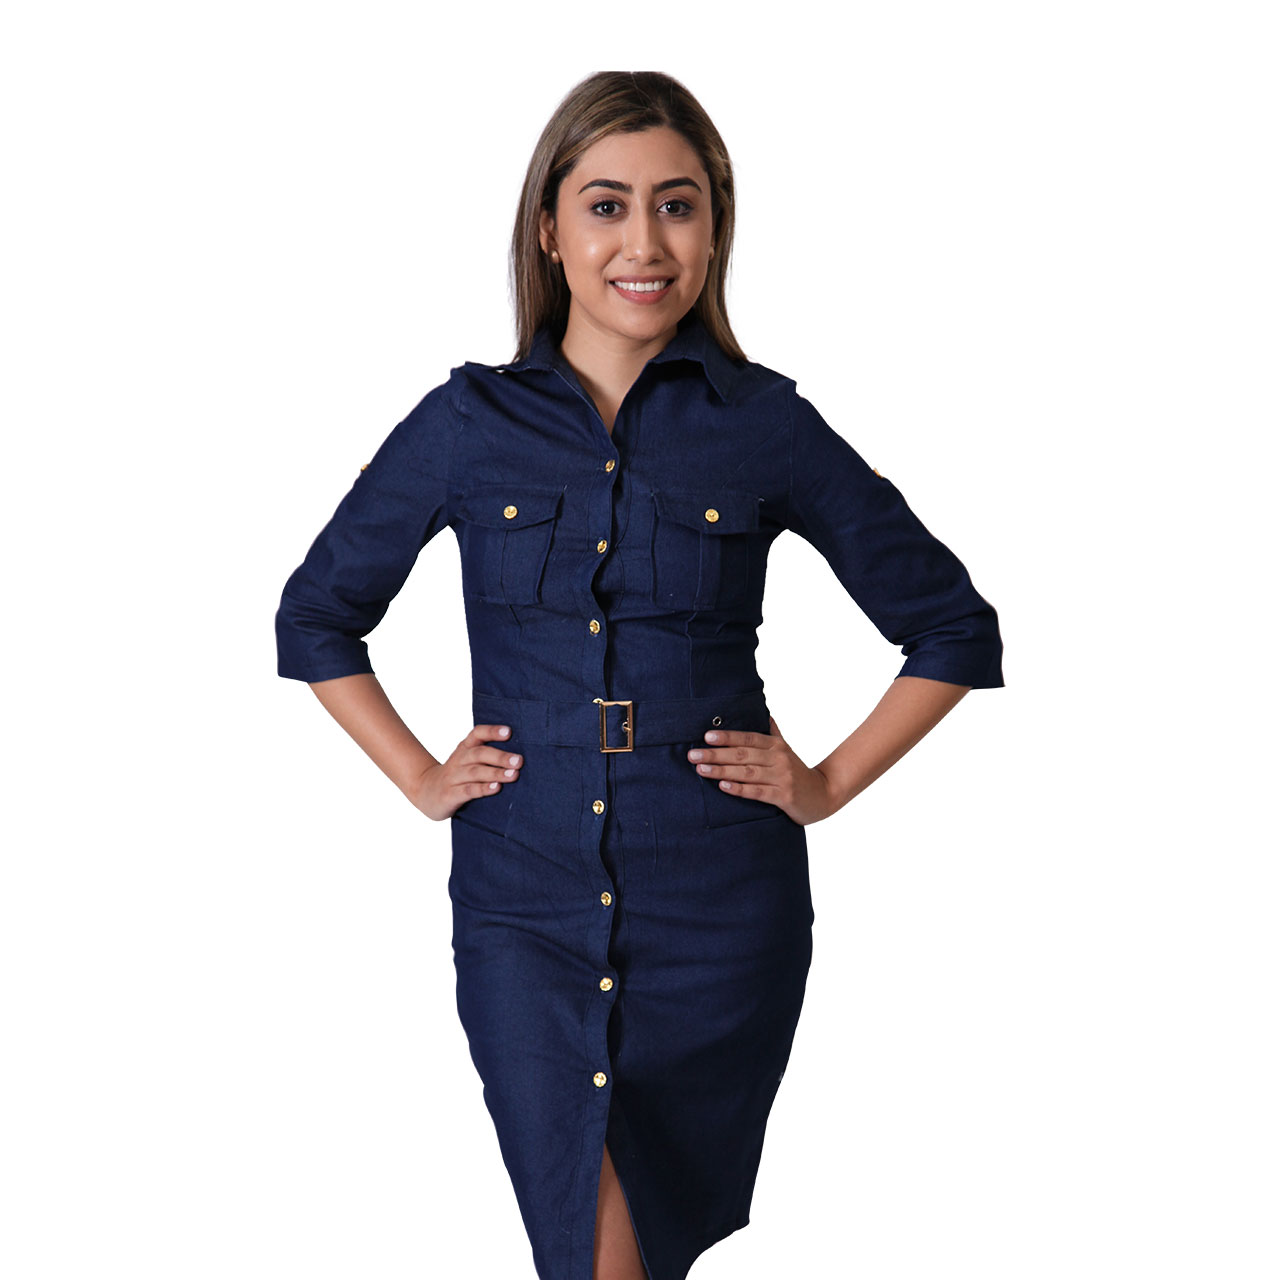 Women's Dark Royal Navy Blue Bodycon Dress 3/4 Sleeve Vintage Casual Collared Button Up Dress